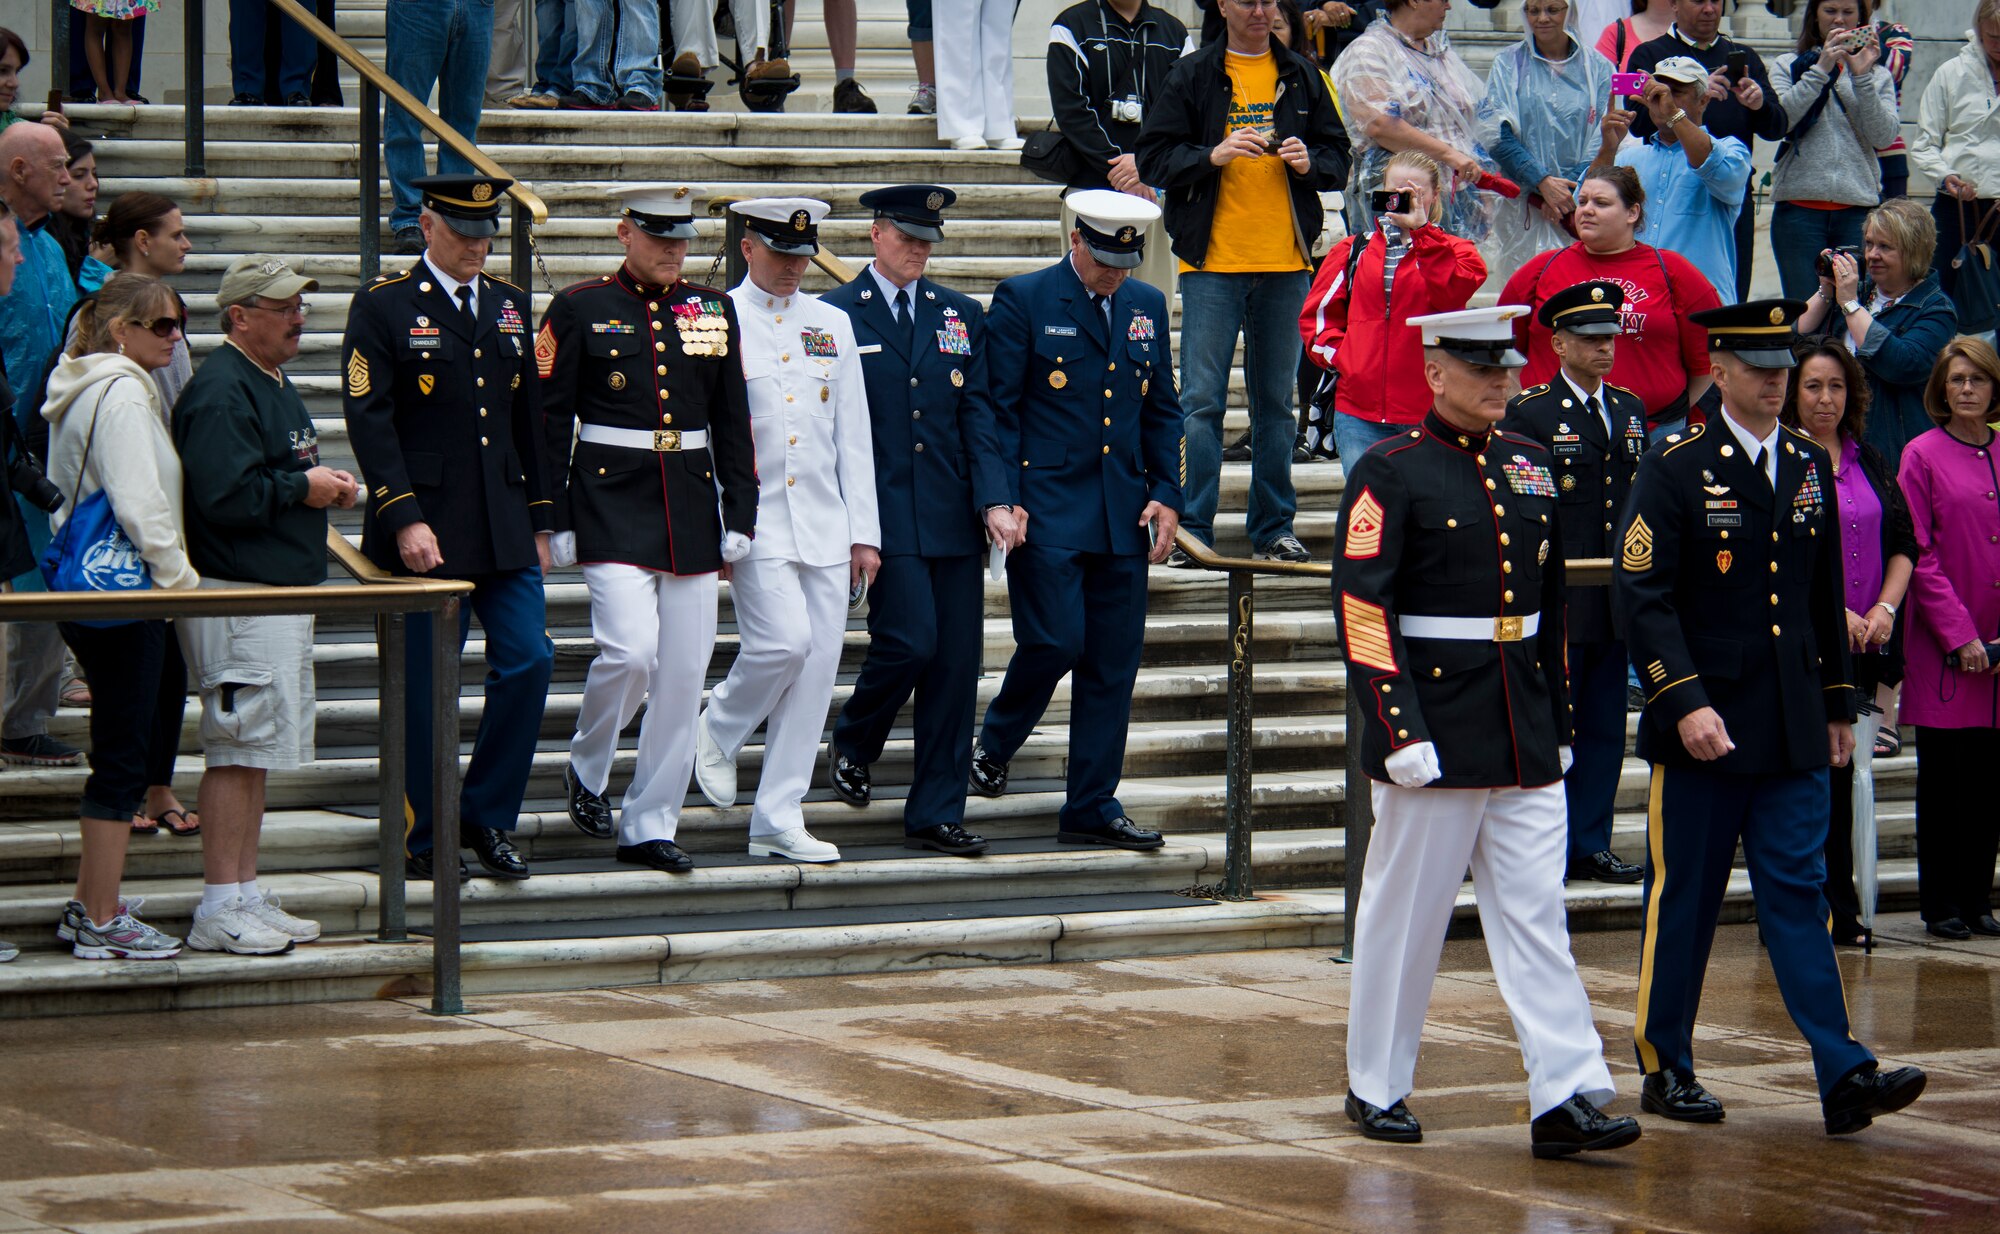 Marine Corps Sgt. Maj. Bryan B. Battaglia and Army Sgt. Maj. David O. Turnbull lead a formation of the senior enlisted leaders from the Army, Navy, Marine Corps, Air Force and Coast Guard during a wreath-laying ceremony May 18, 2013, at the Tomb of the Unknown Solider at Arlington National Cemetery, Va. The ceremony celebrates the unification of all the military forces under a single Department of Defense, while honoring service member’s sacrifices throughout the nation’s history. Turnbull is the Military of Washington and Joint Force Headquarters National Capital Region command sergeant major, and Battaglia is the senior enlisted adviser to the chairman of the Joint Chiefs of Staff. (U.S. Air Force photo/Senior Airman Andrew Lee)